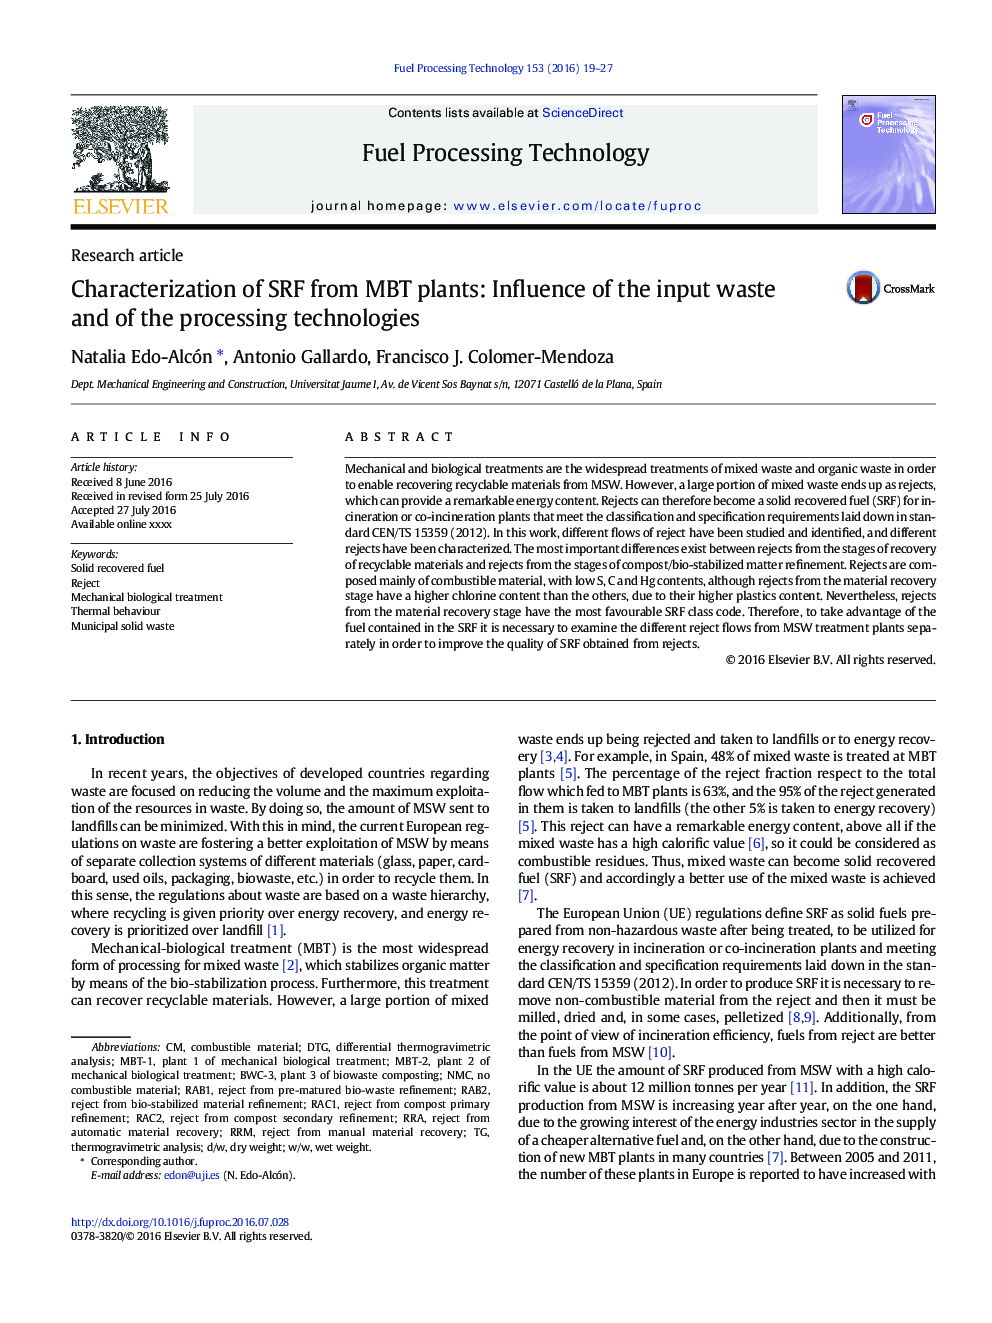 Characterization of SRF from MBT plants: Influence of the input waste and of the processing technologies